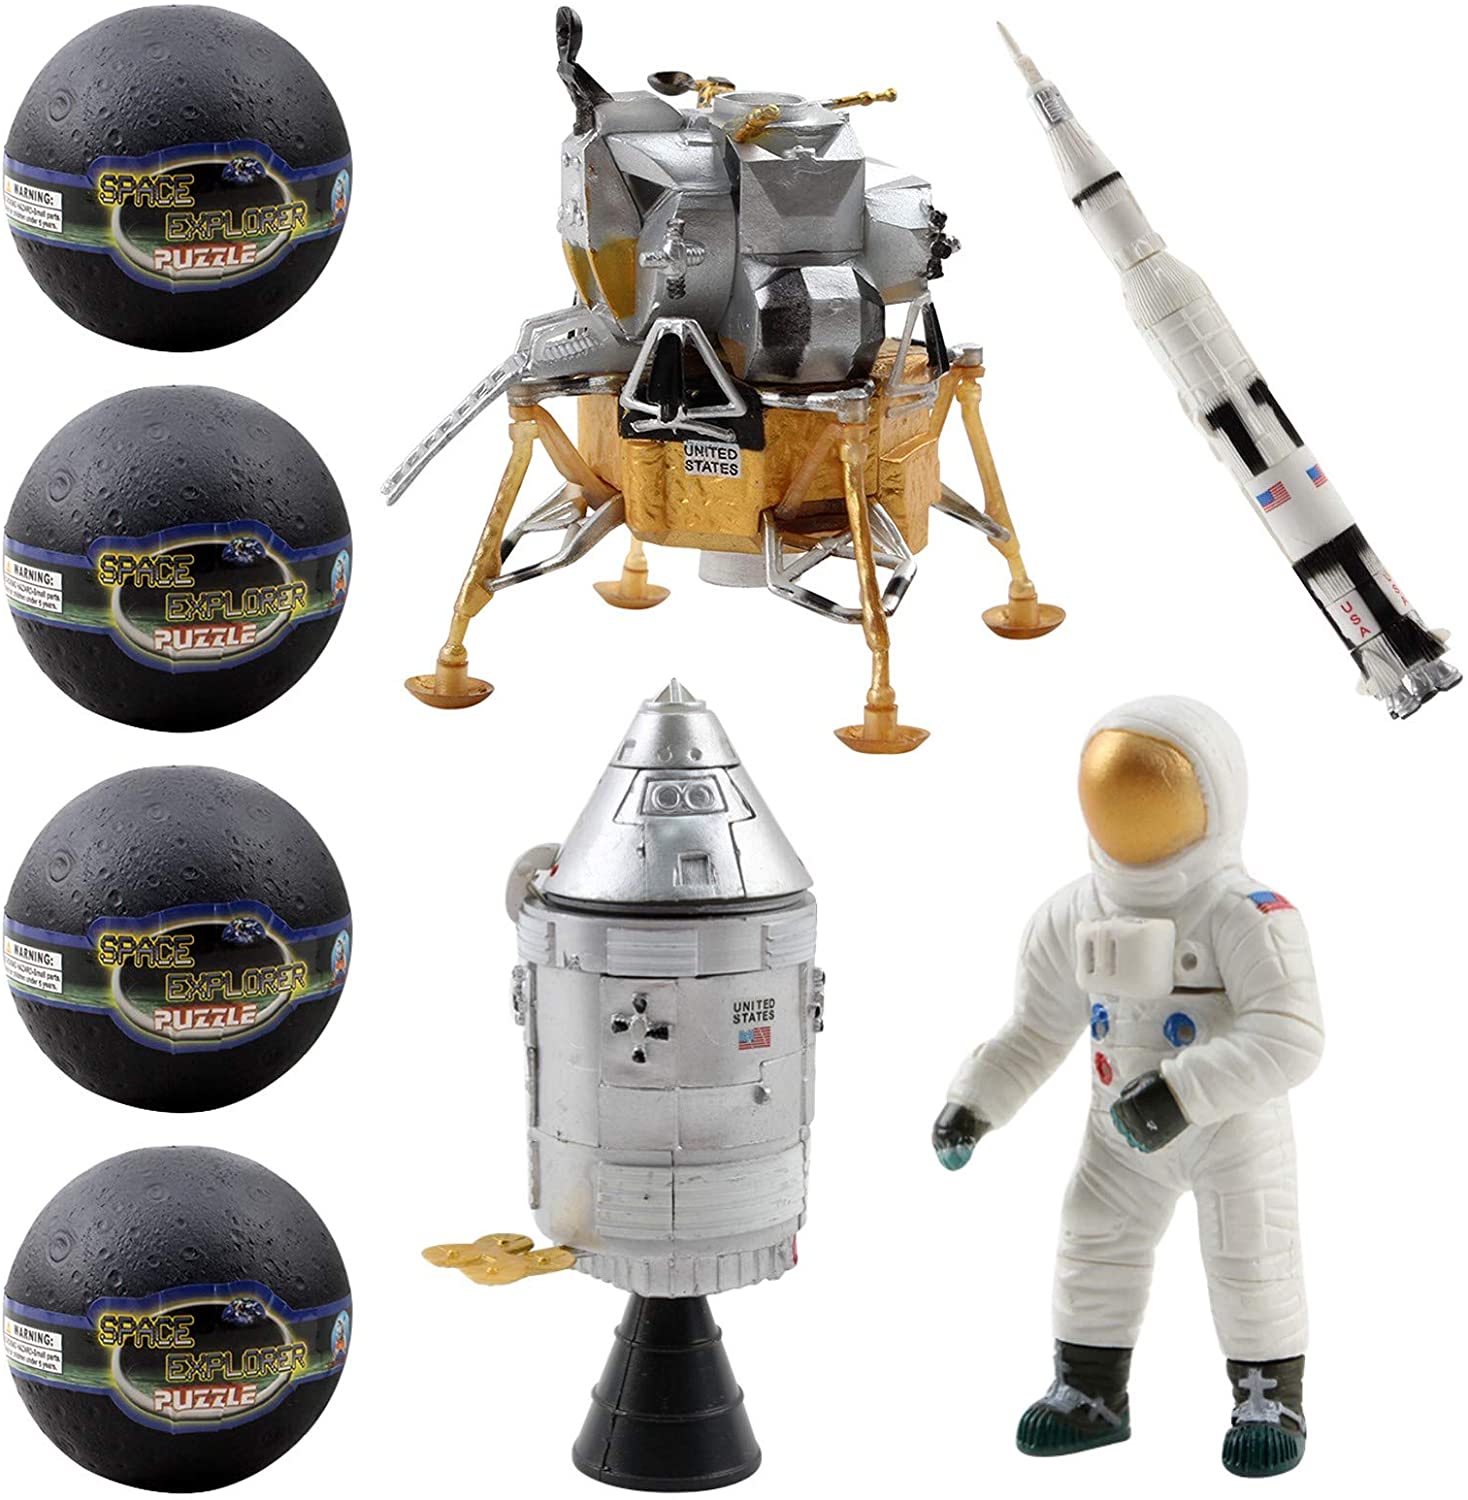 Space Toys Station Building Kit in 4 Moon Capsules Kids 3D Puzzle with Astronaut Rocket Pod and Lunar Lander Science NASA Shuttle Exploration STEM Education Easter Great Gift Children Boy Girl